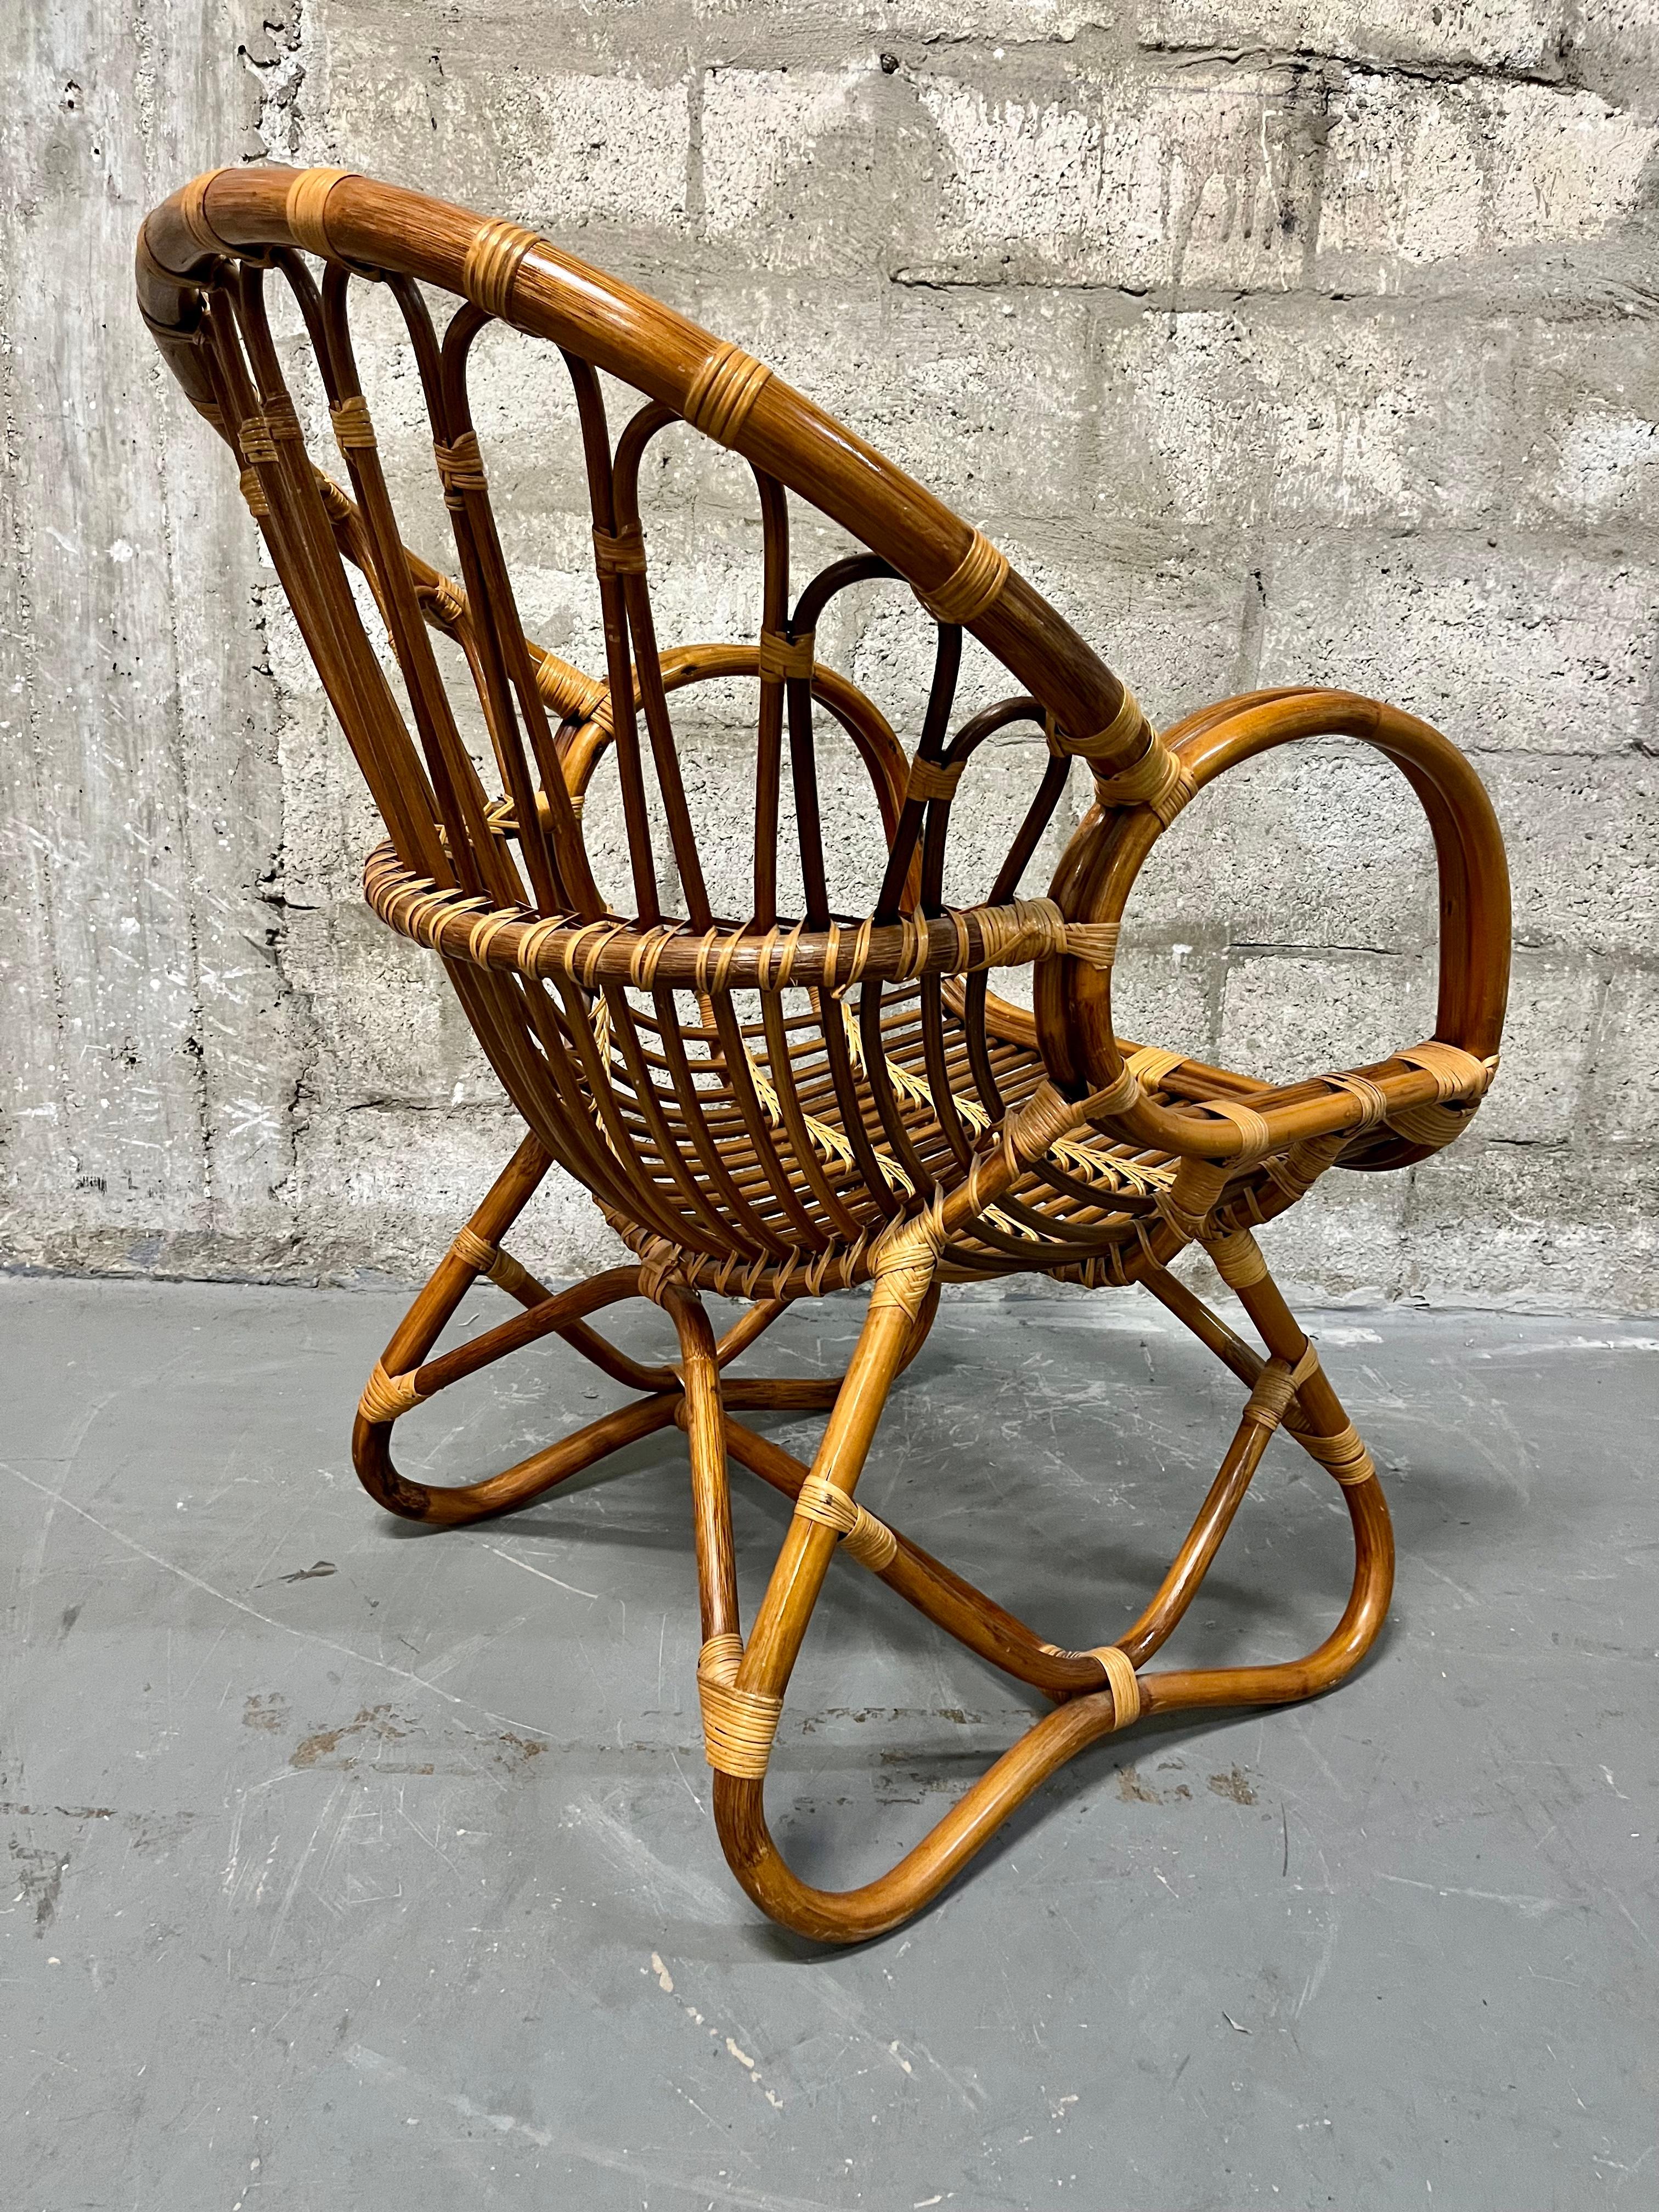 Mid-20th Century Mid Century Modern Rattan Lounge Chair in the Franco Albini's Style. Circa 1970s For Sale